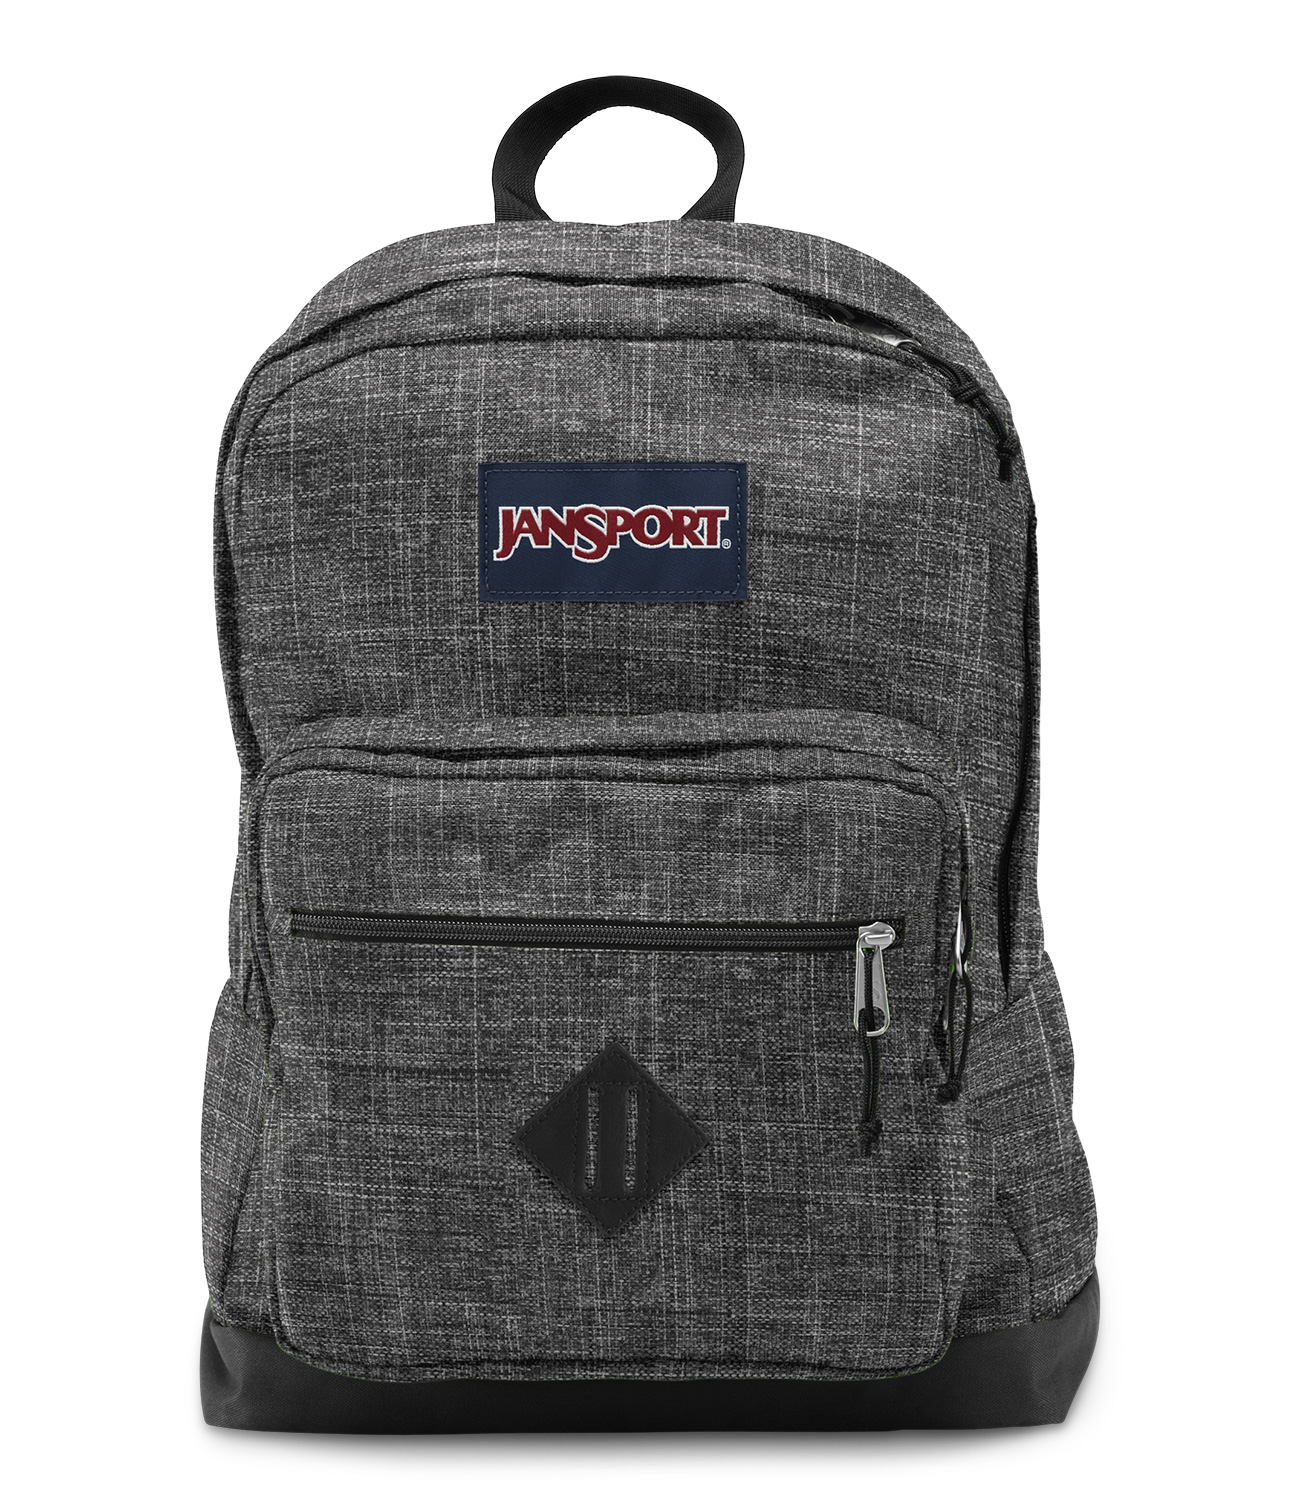 Buy CITY SCOUT BACKPACK Bag from JanSport Aus